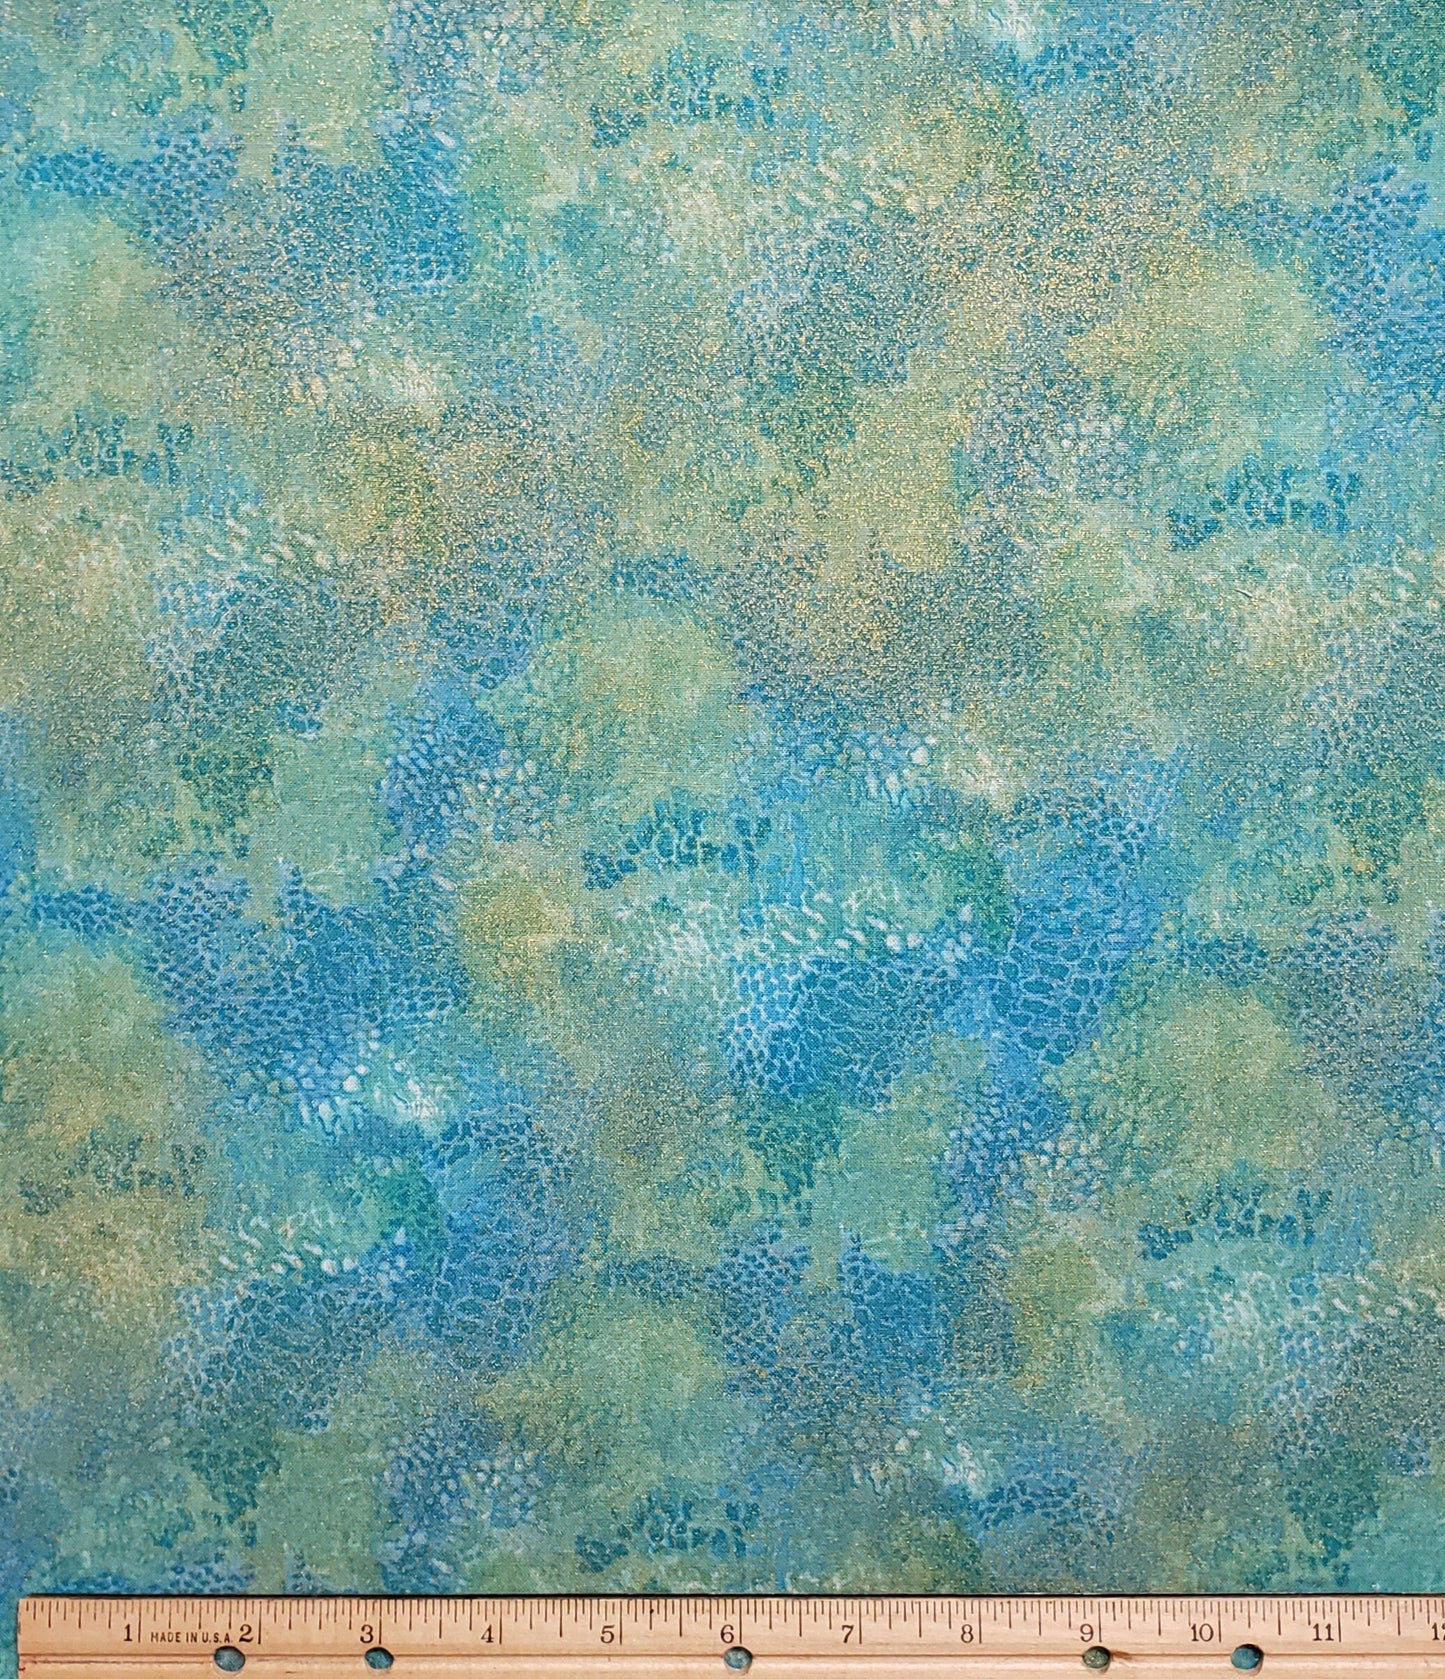 Rain Forest by Ro Gregg Pattern 2598M Northcott - Bright Blue and Pale Green / Marbled Fabric with Gold Metallic Shimmer